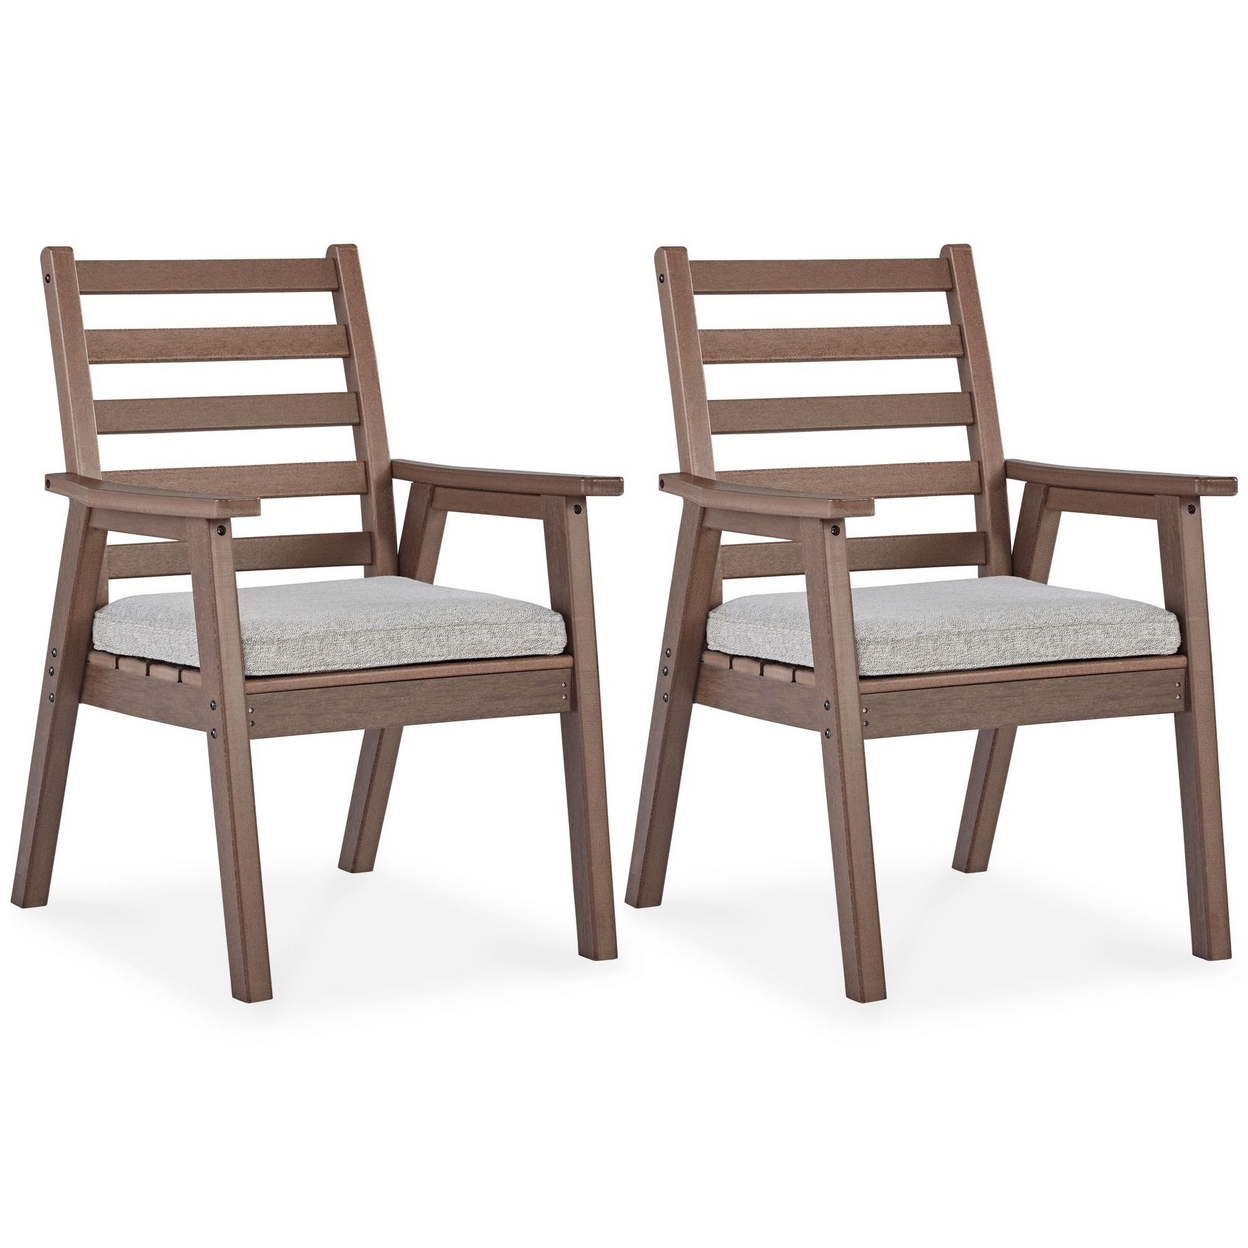 Emme 27 Inch Outdoor Dining Armchair Set Of 2, Brown Frame And Gray Seat - Saltoro Sherpi